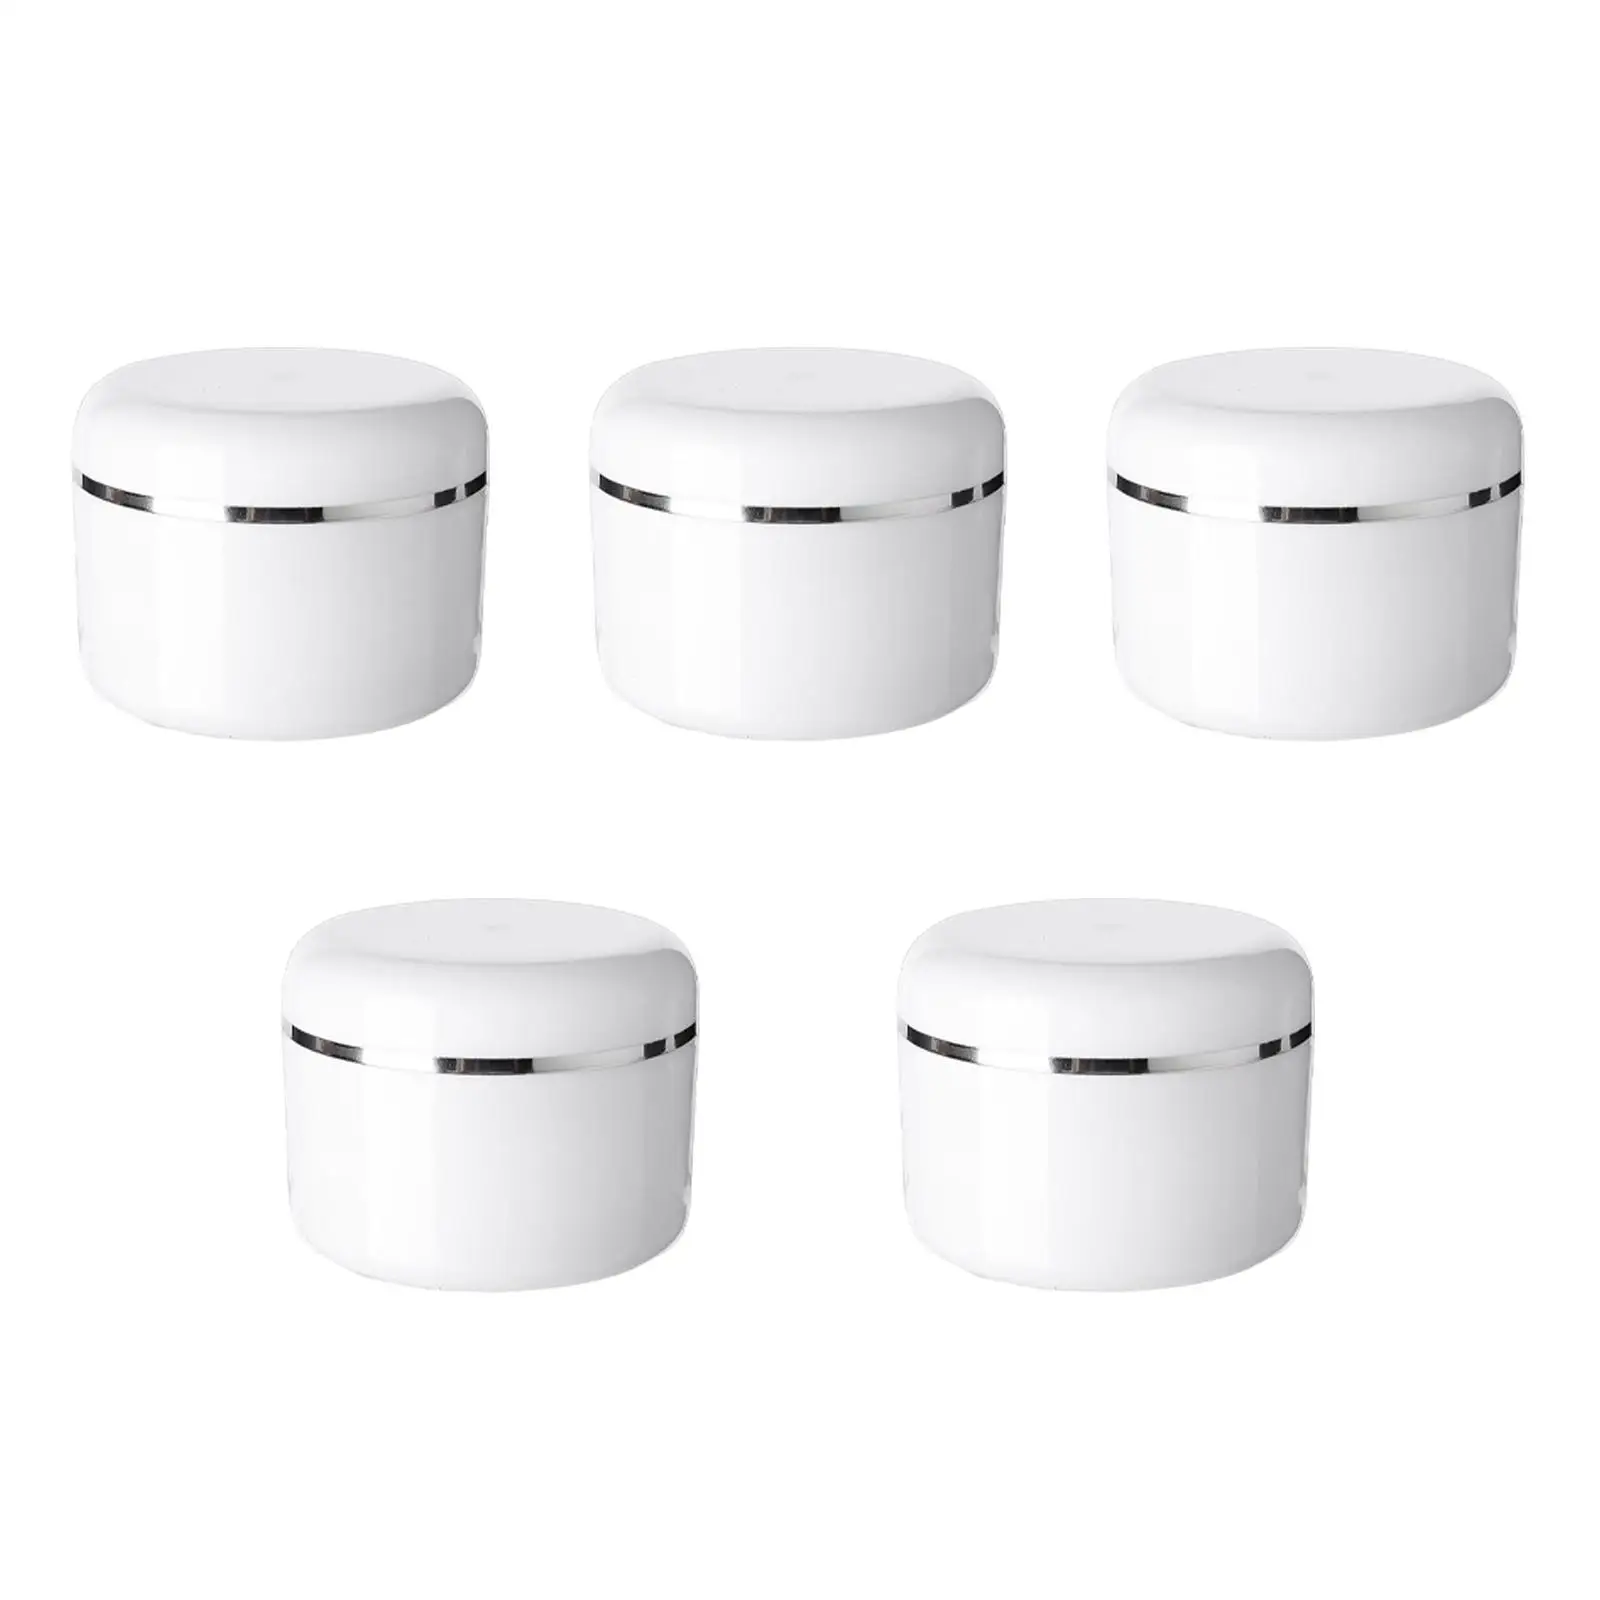 Set of 5 Empty Cosmetic Jars for Homemade Makeup and Facial Lotions